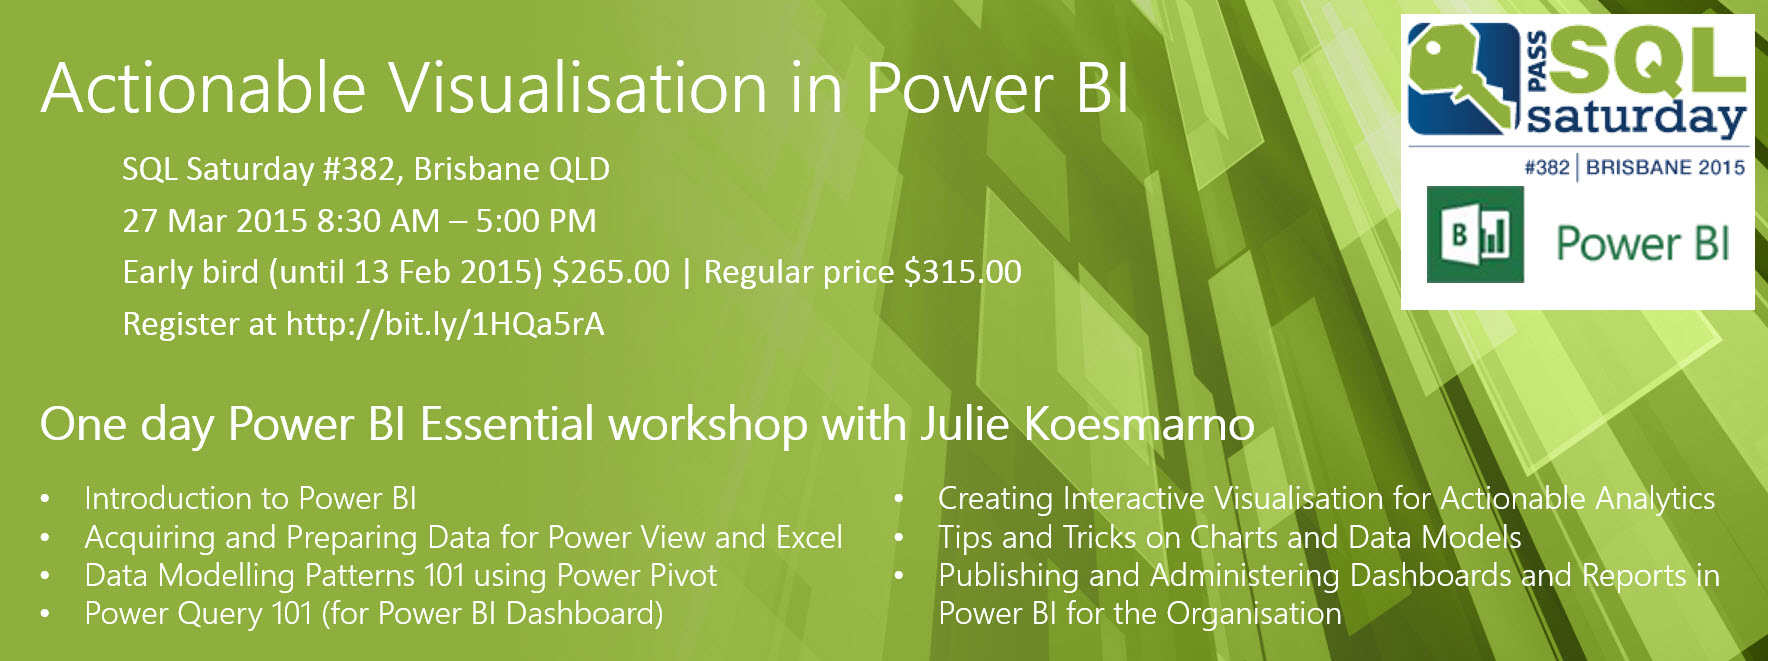 Actionable Visualisation in Power BI with Julie Koesmarno on 27 Mar 2015 in Brisbane, QLD